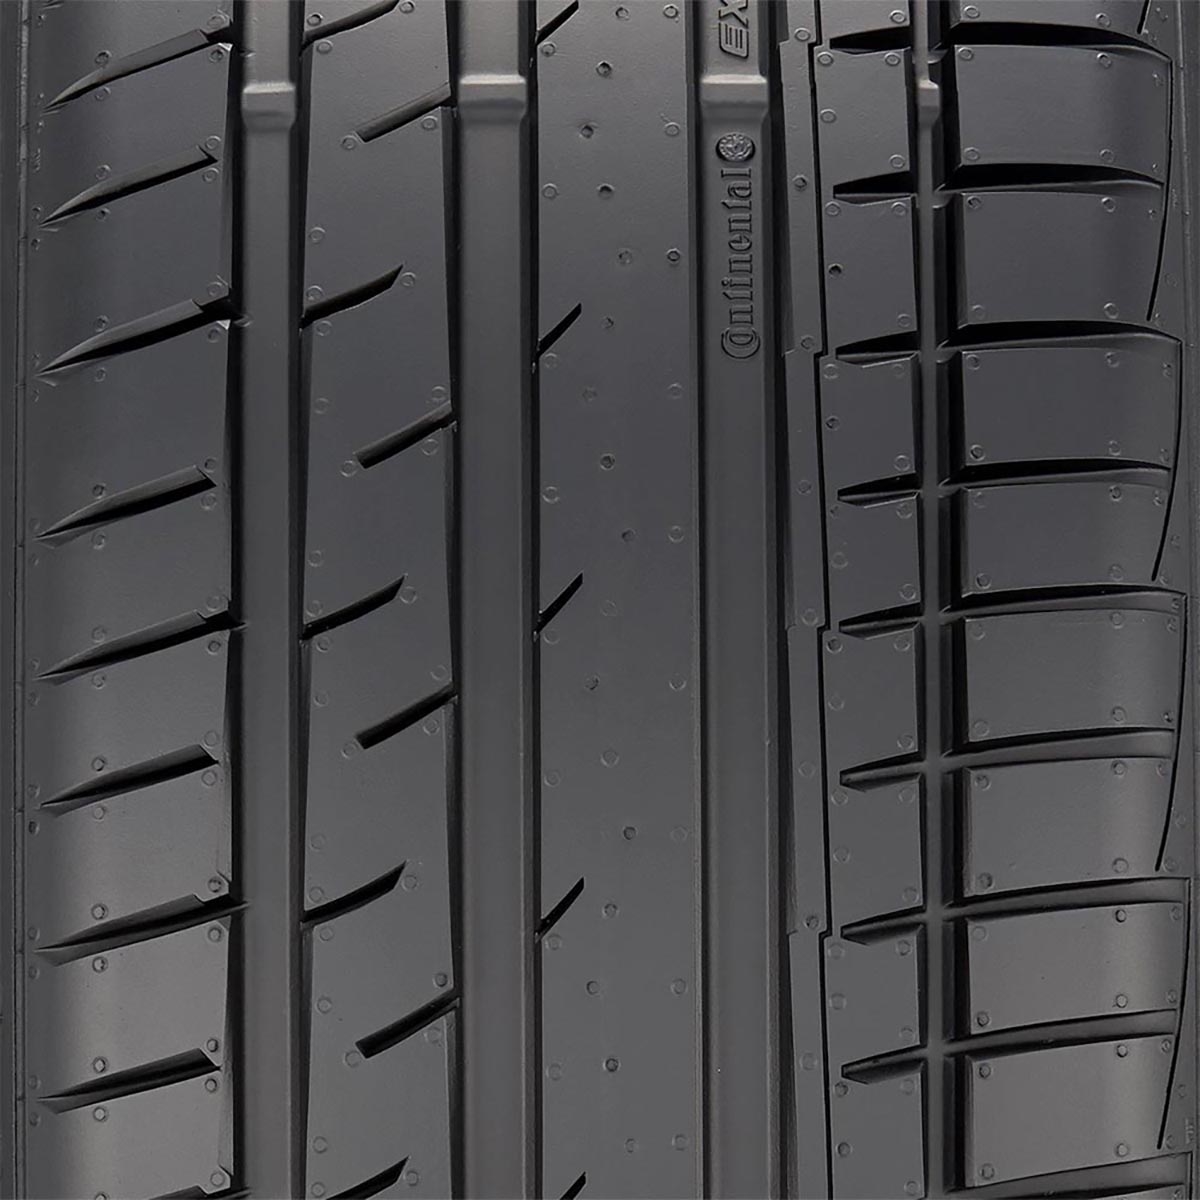 Pneu 225/45R17 Continental ExtremeContact DW 91W                                                                                                                                                        